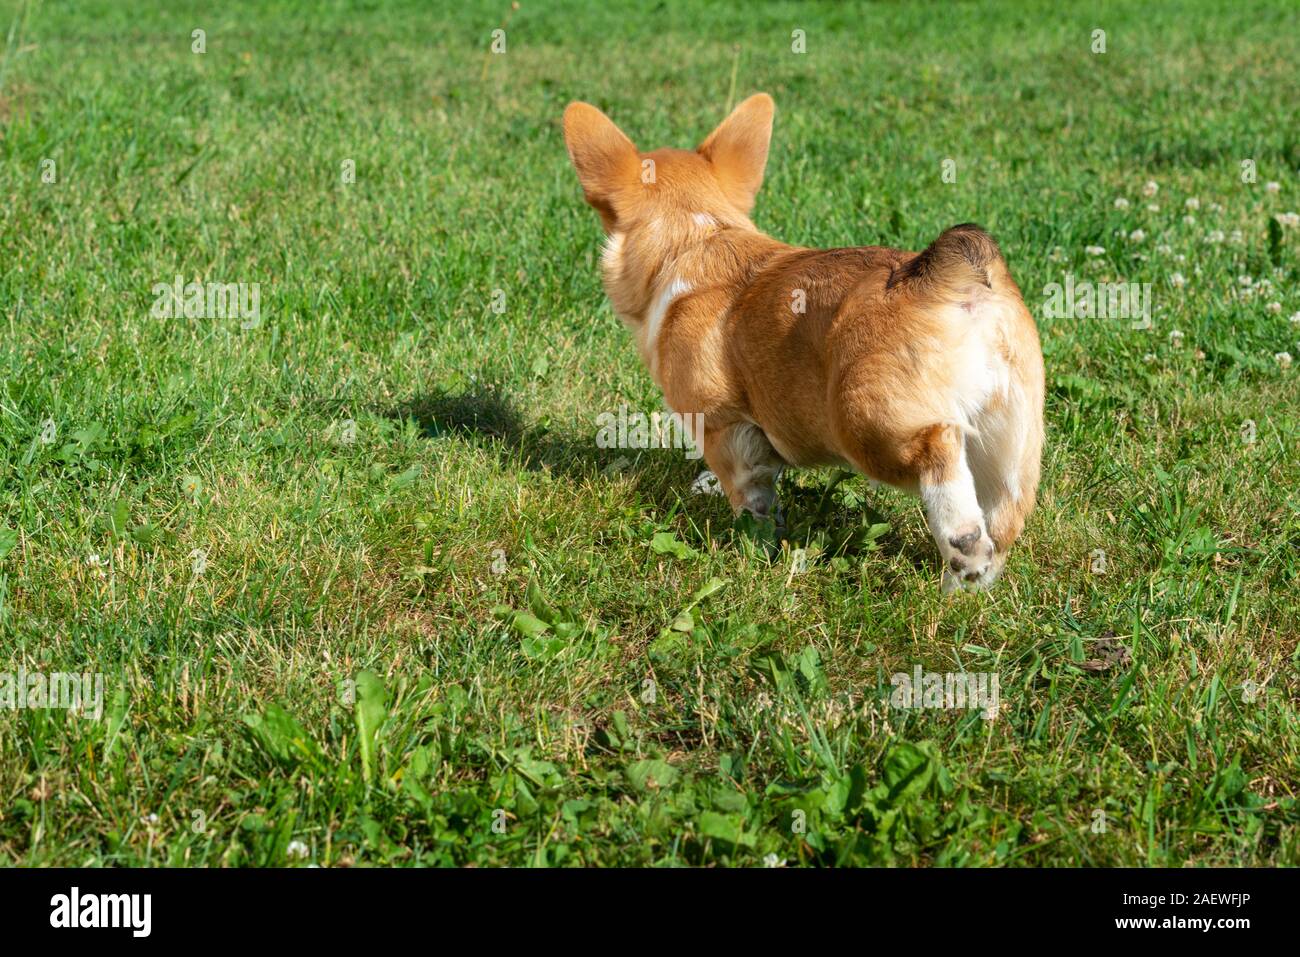 Pembroke Welsh Corgi puppy stands back on the grass background Stock Photo